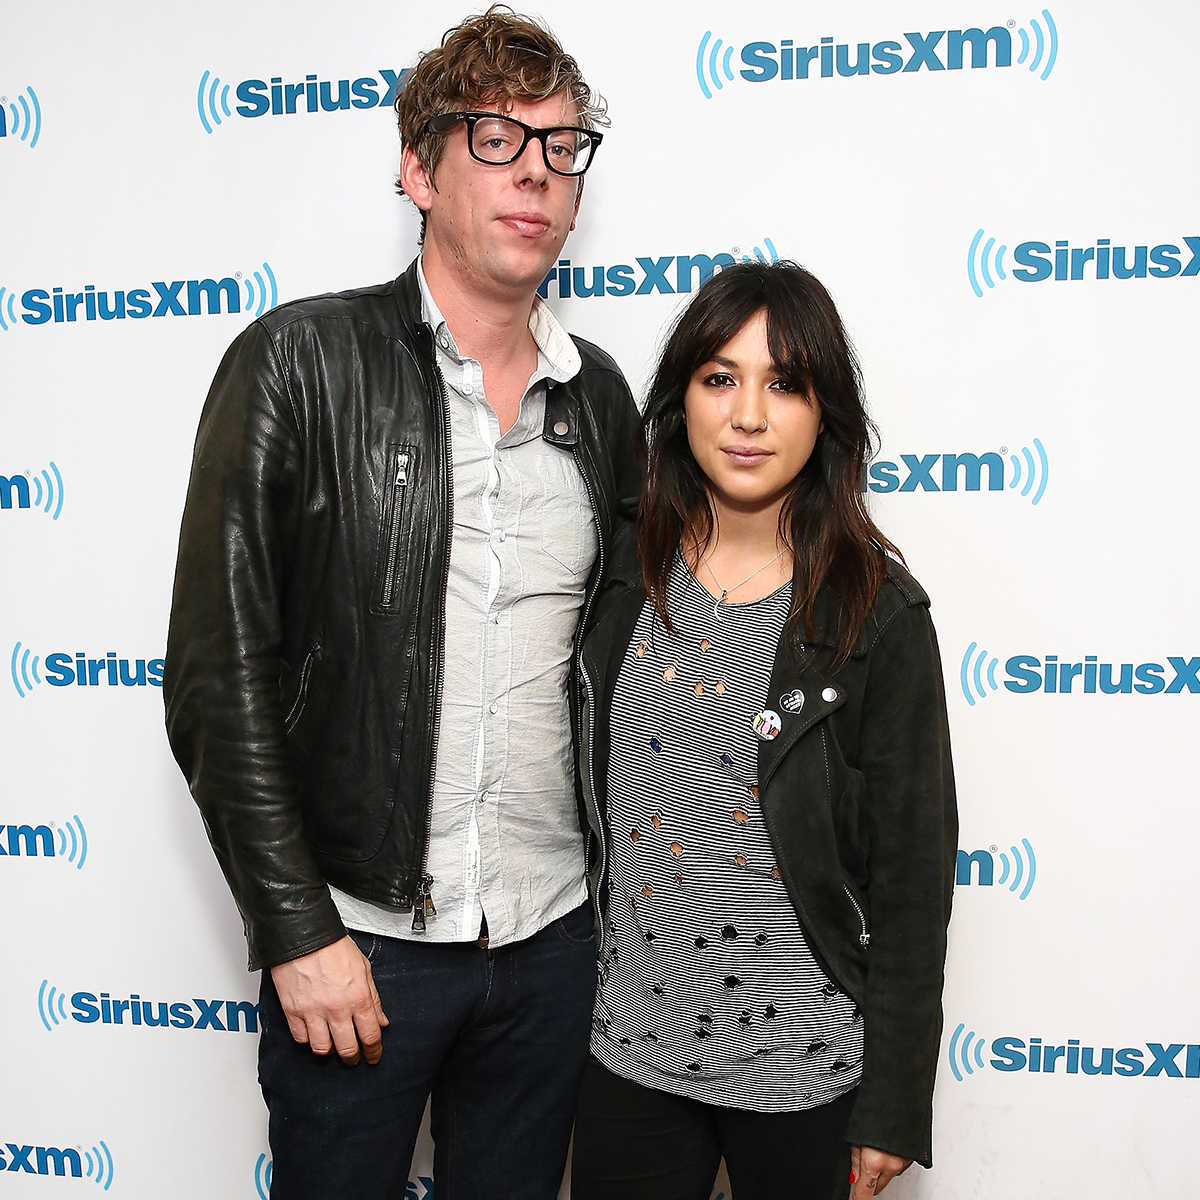 Michelle Branch Is No Longer 'Everywhere' And Here's Why